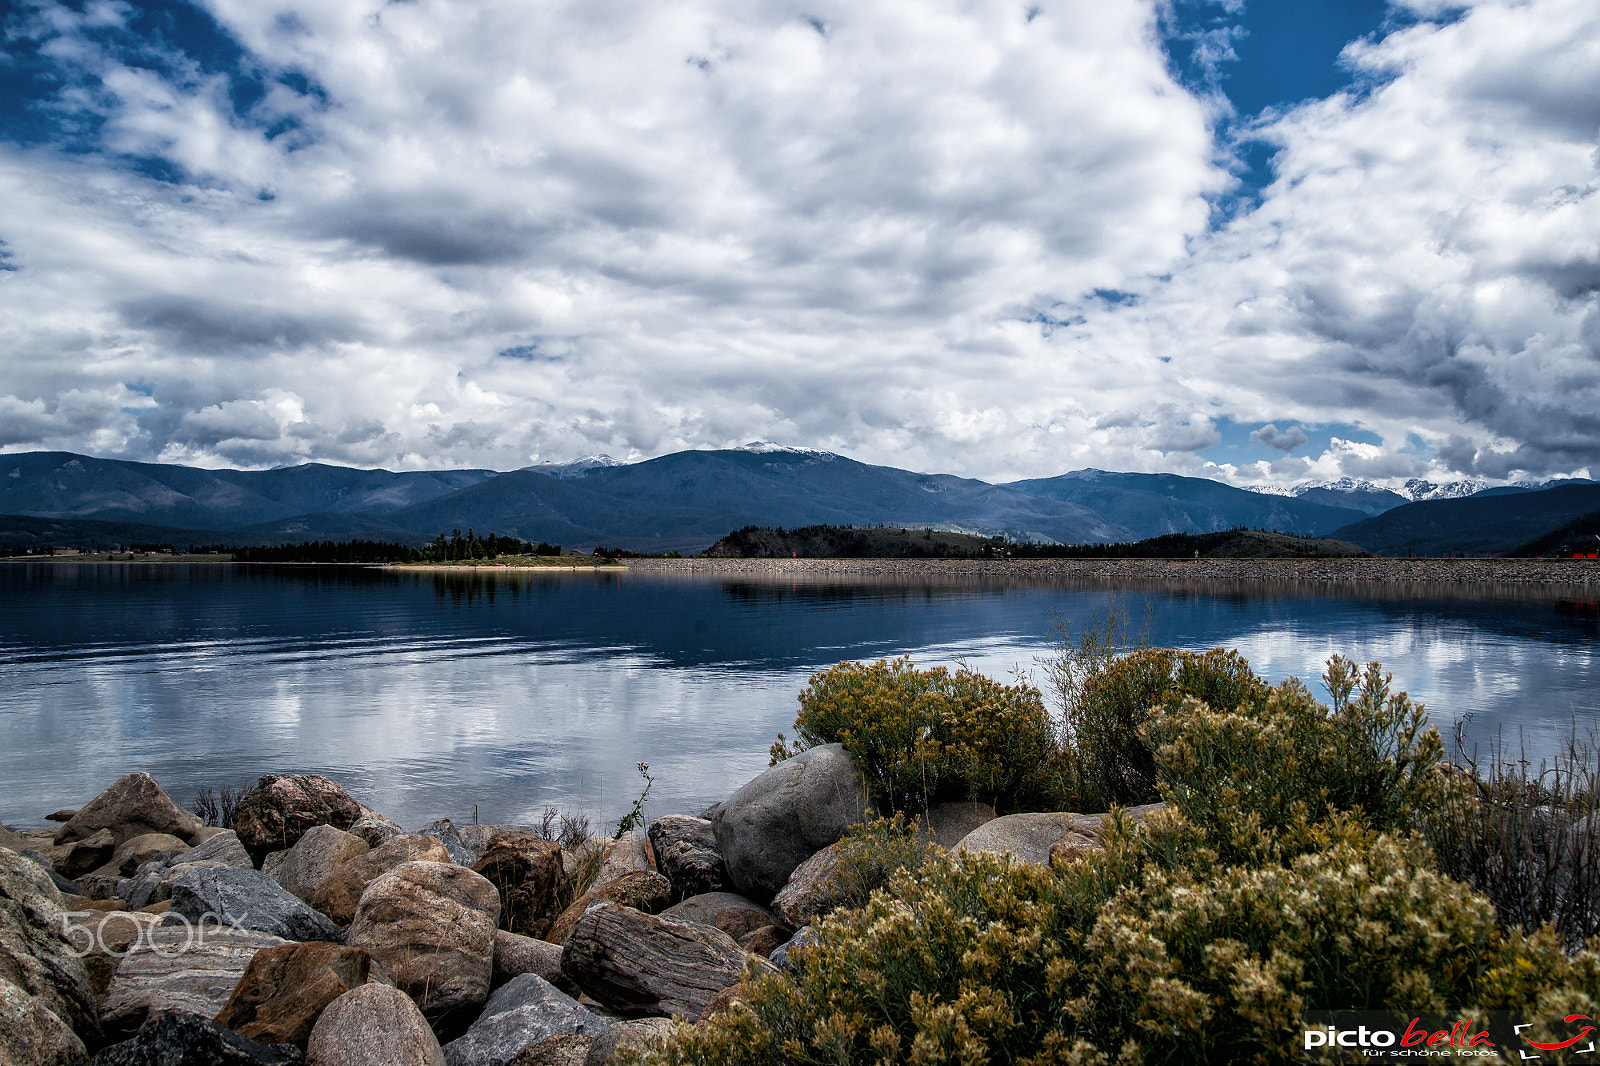 Sony Alpha DSLR-A850 sample photo. The lake in the rocky mountain photography